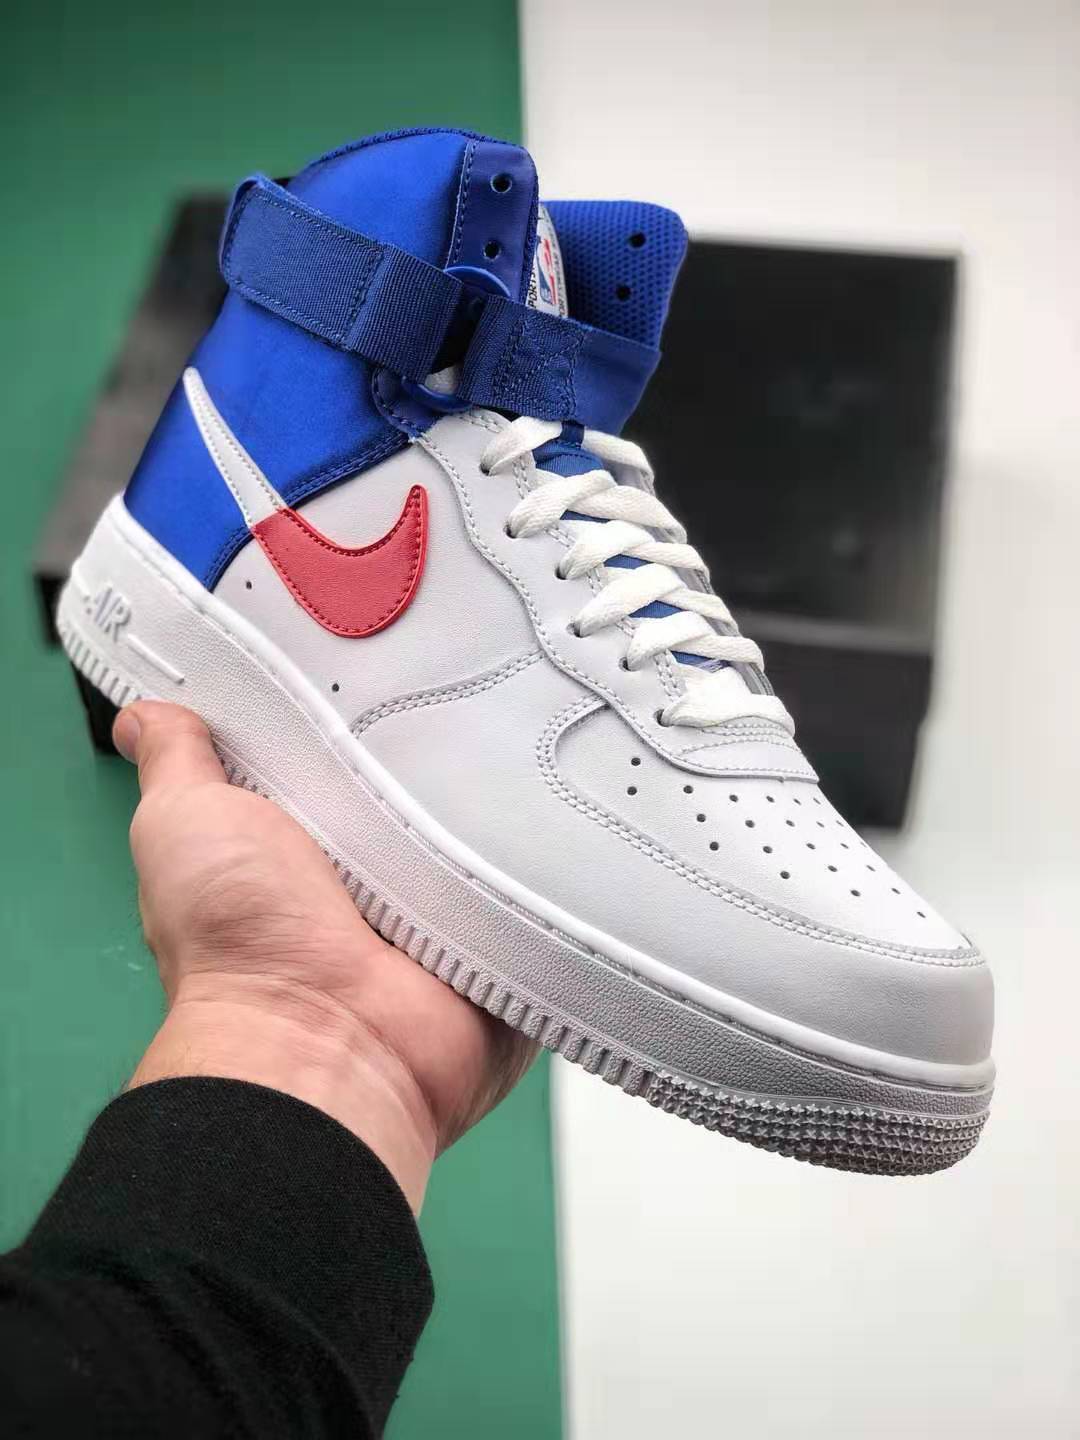 Nike NBA x Air Force 1 High '07 Clippers BQ4591-102 - Premium Basketball Sneakers for Clippers Fans